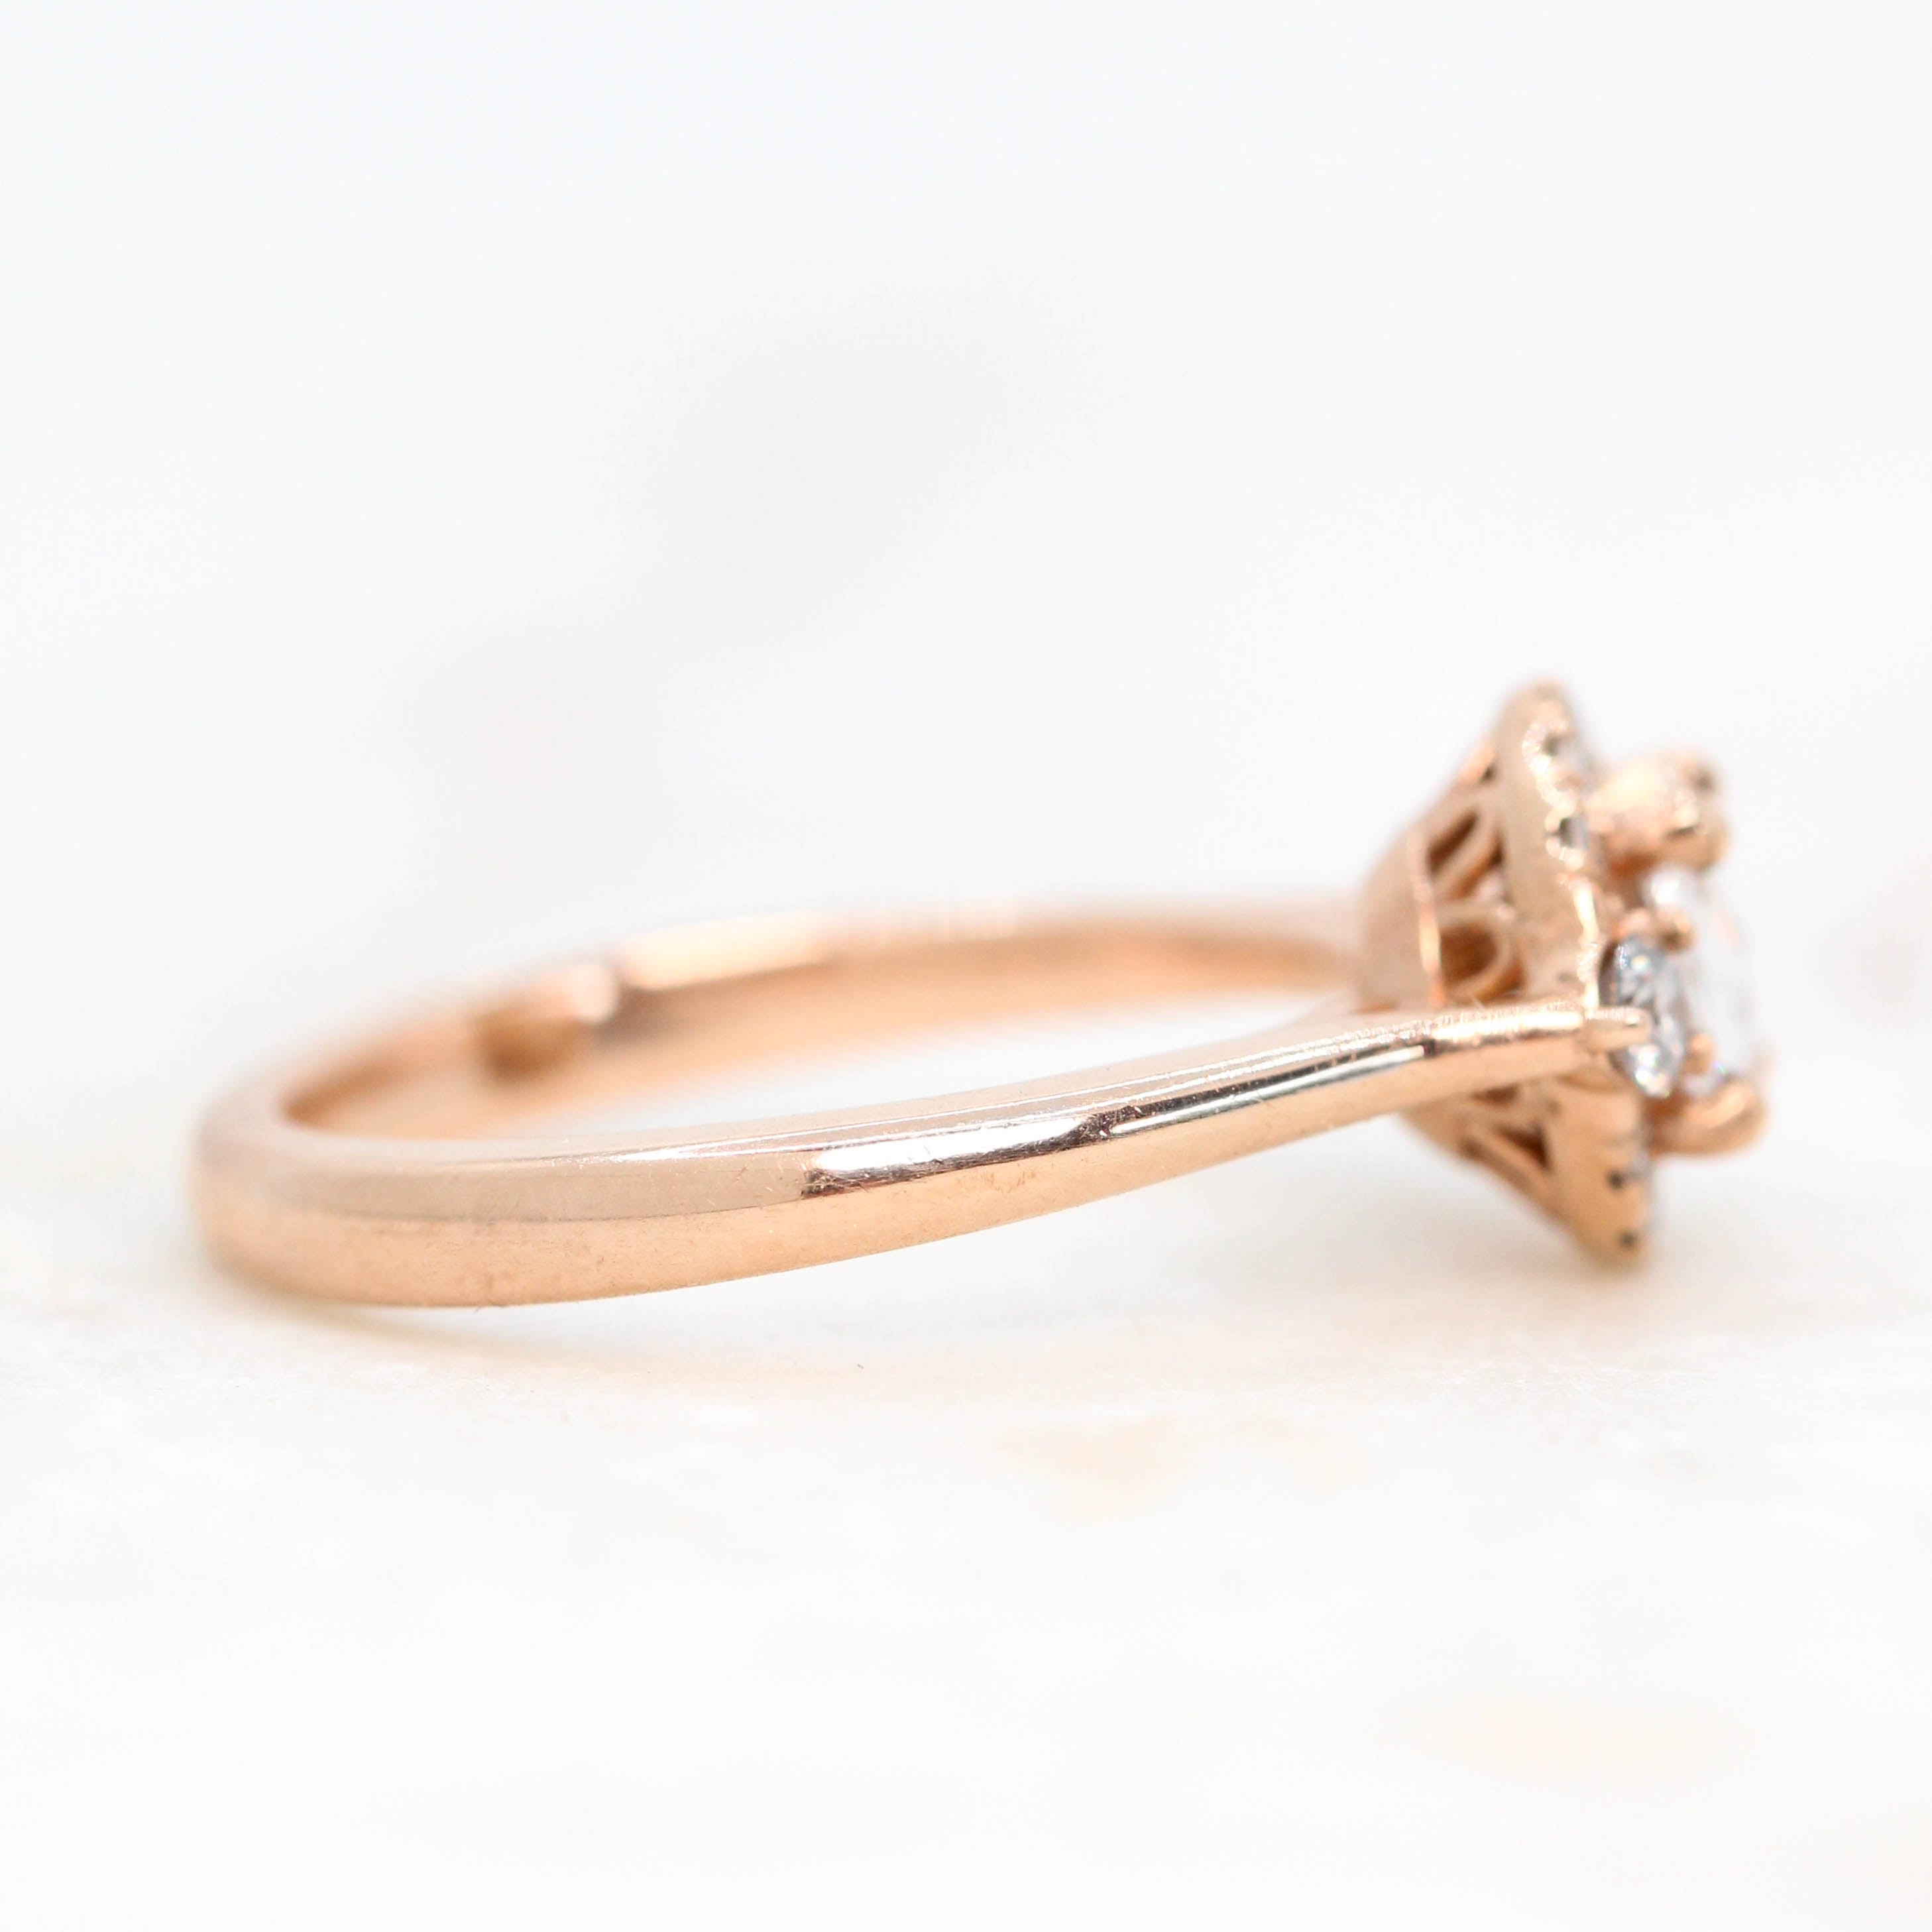 Vanessa Ring with 0.41 Carat Rose Cut Clear Round Diamond and Natural Diamond Accents in 10k Rose Gold - Ready to Size and Ship - Midwinter Co. Alternative Bridal Rings and Modern Fine Jewelry